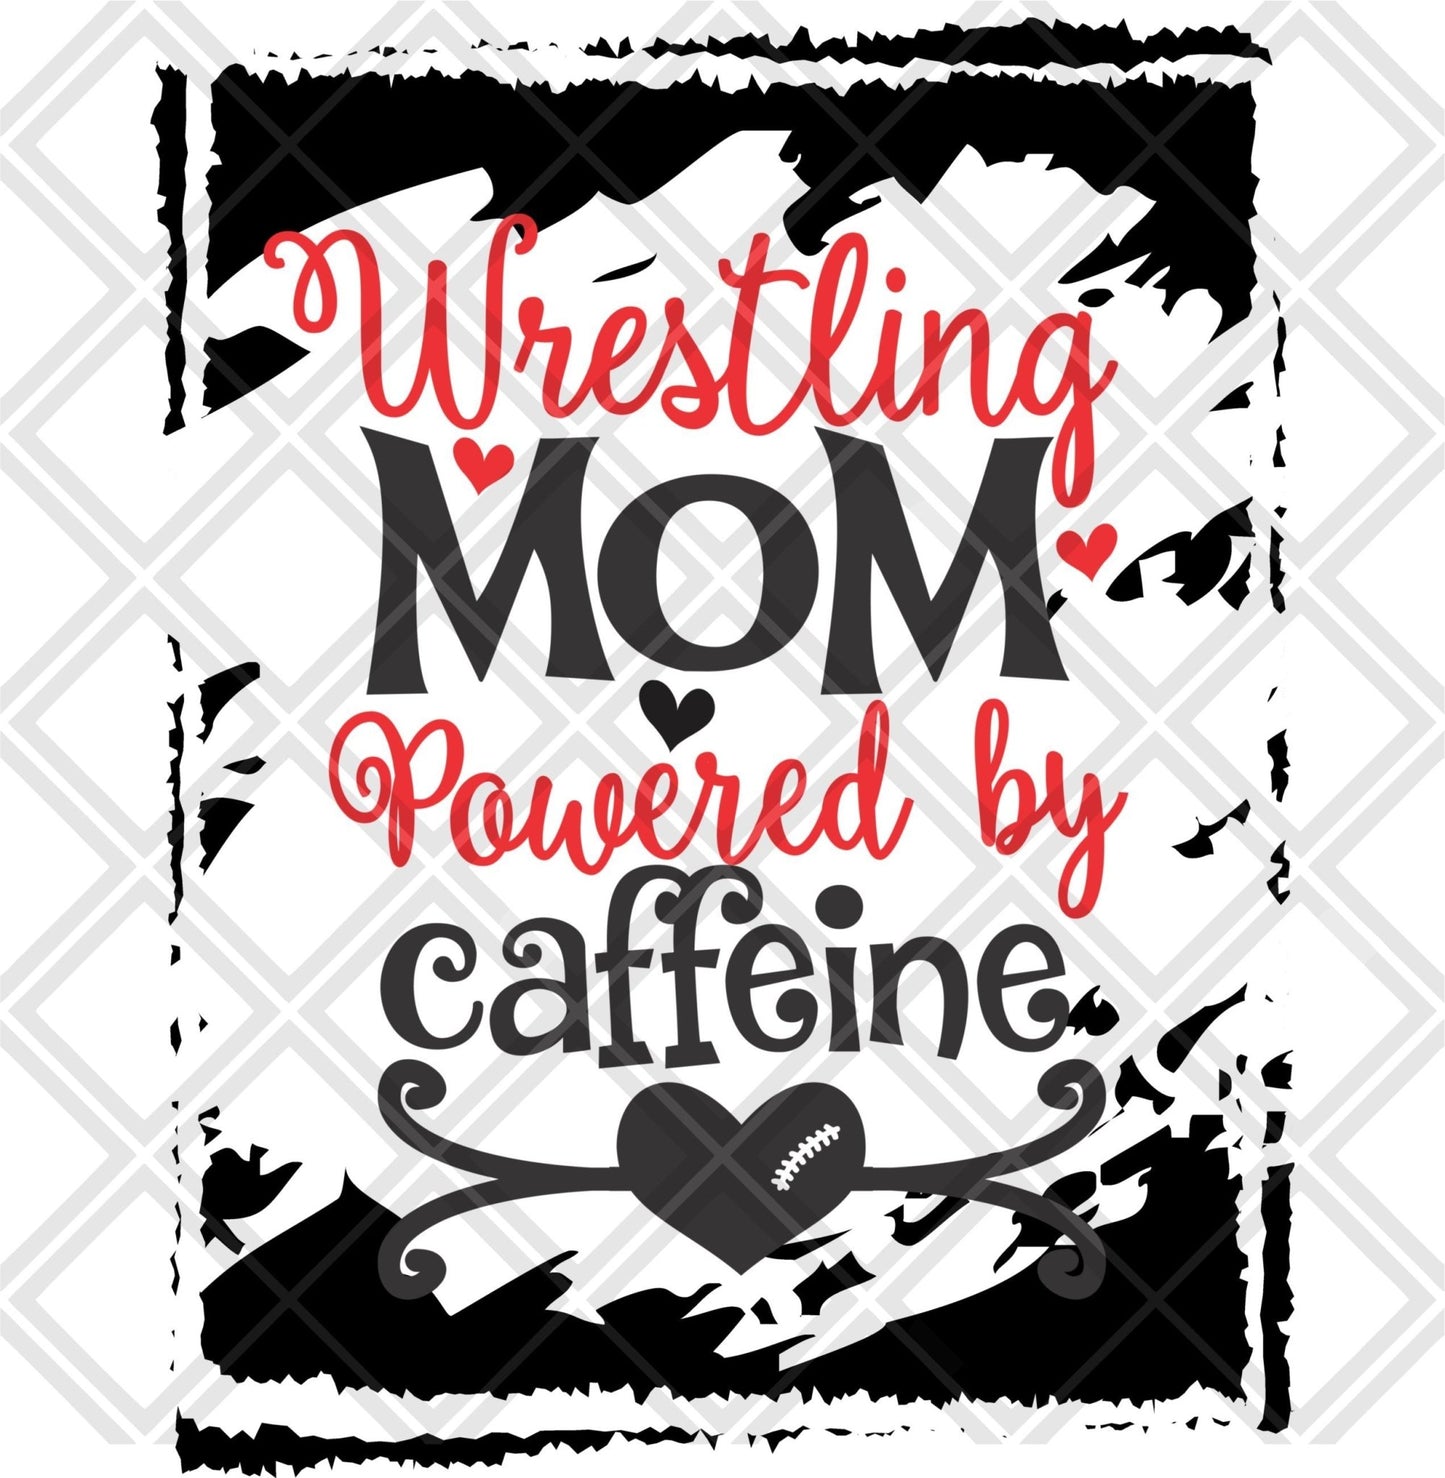 Wrestling Mom Powered By Caffeine DTF TRANSFERPRINT TO ORDER - Do it yourself Transfers